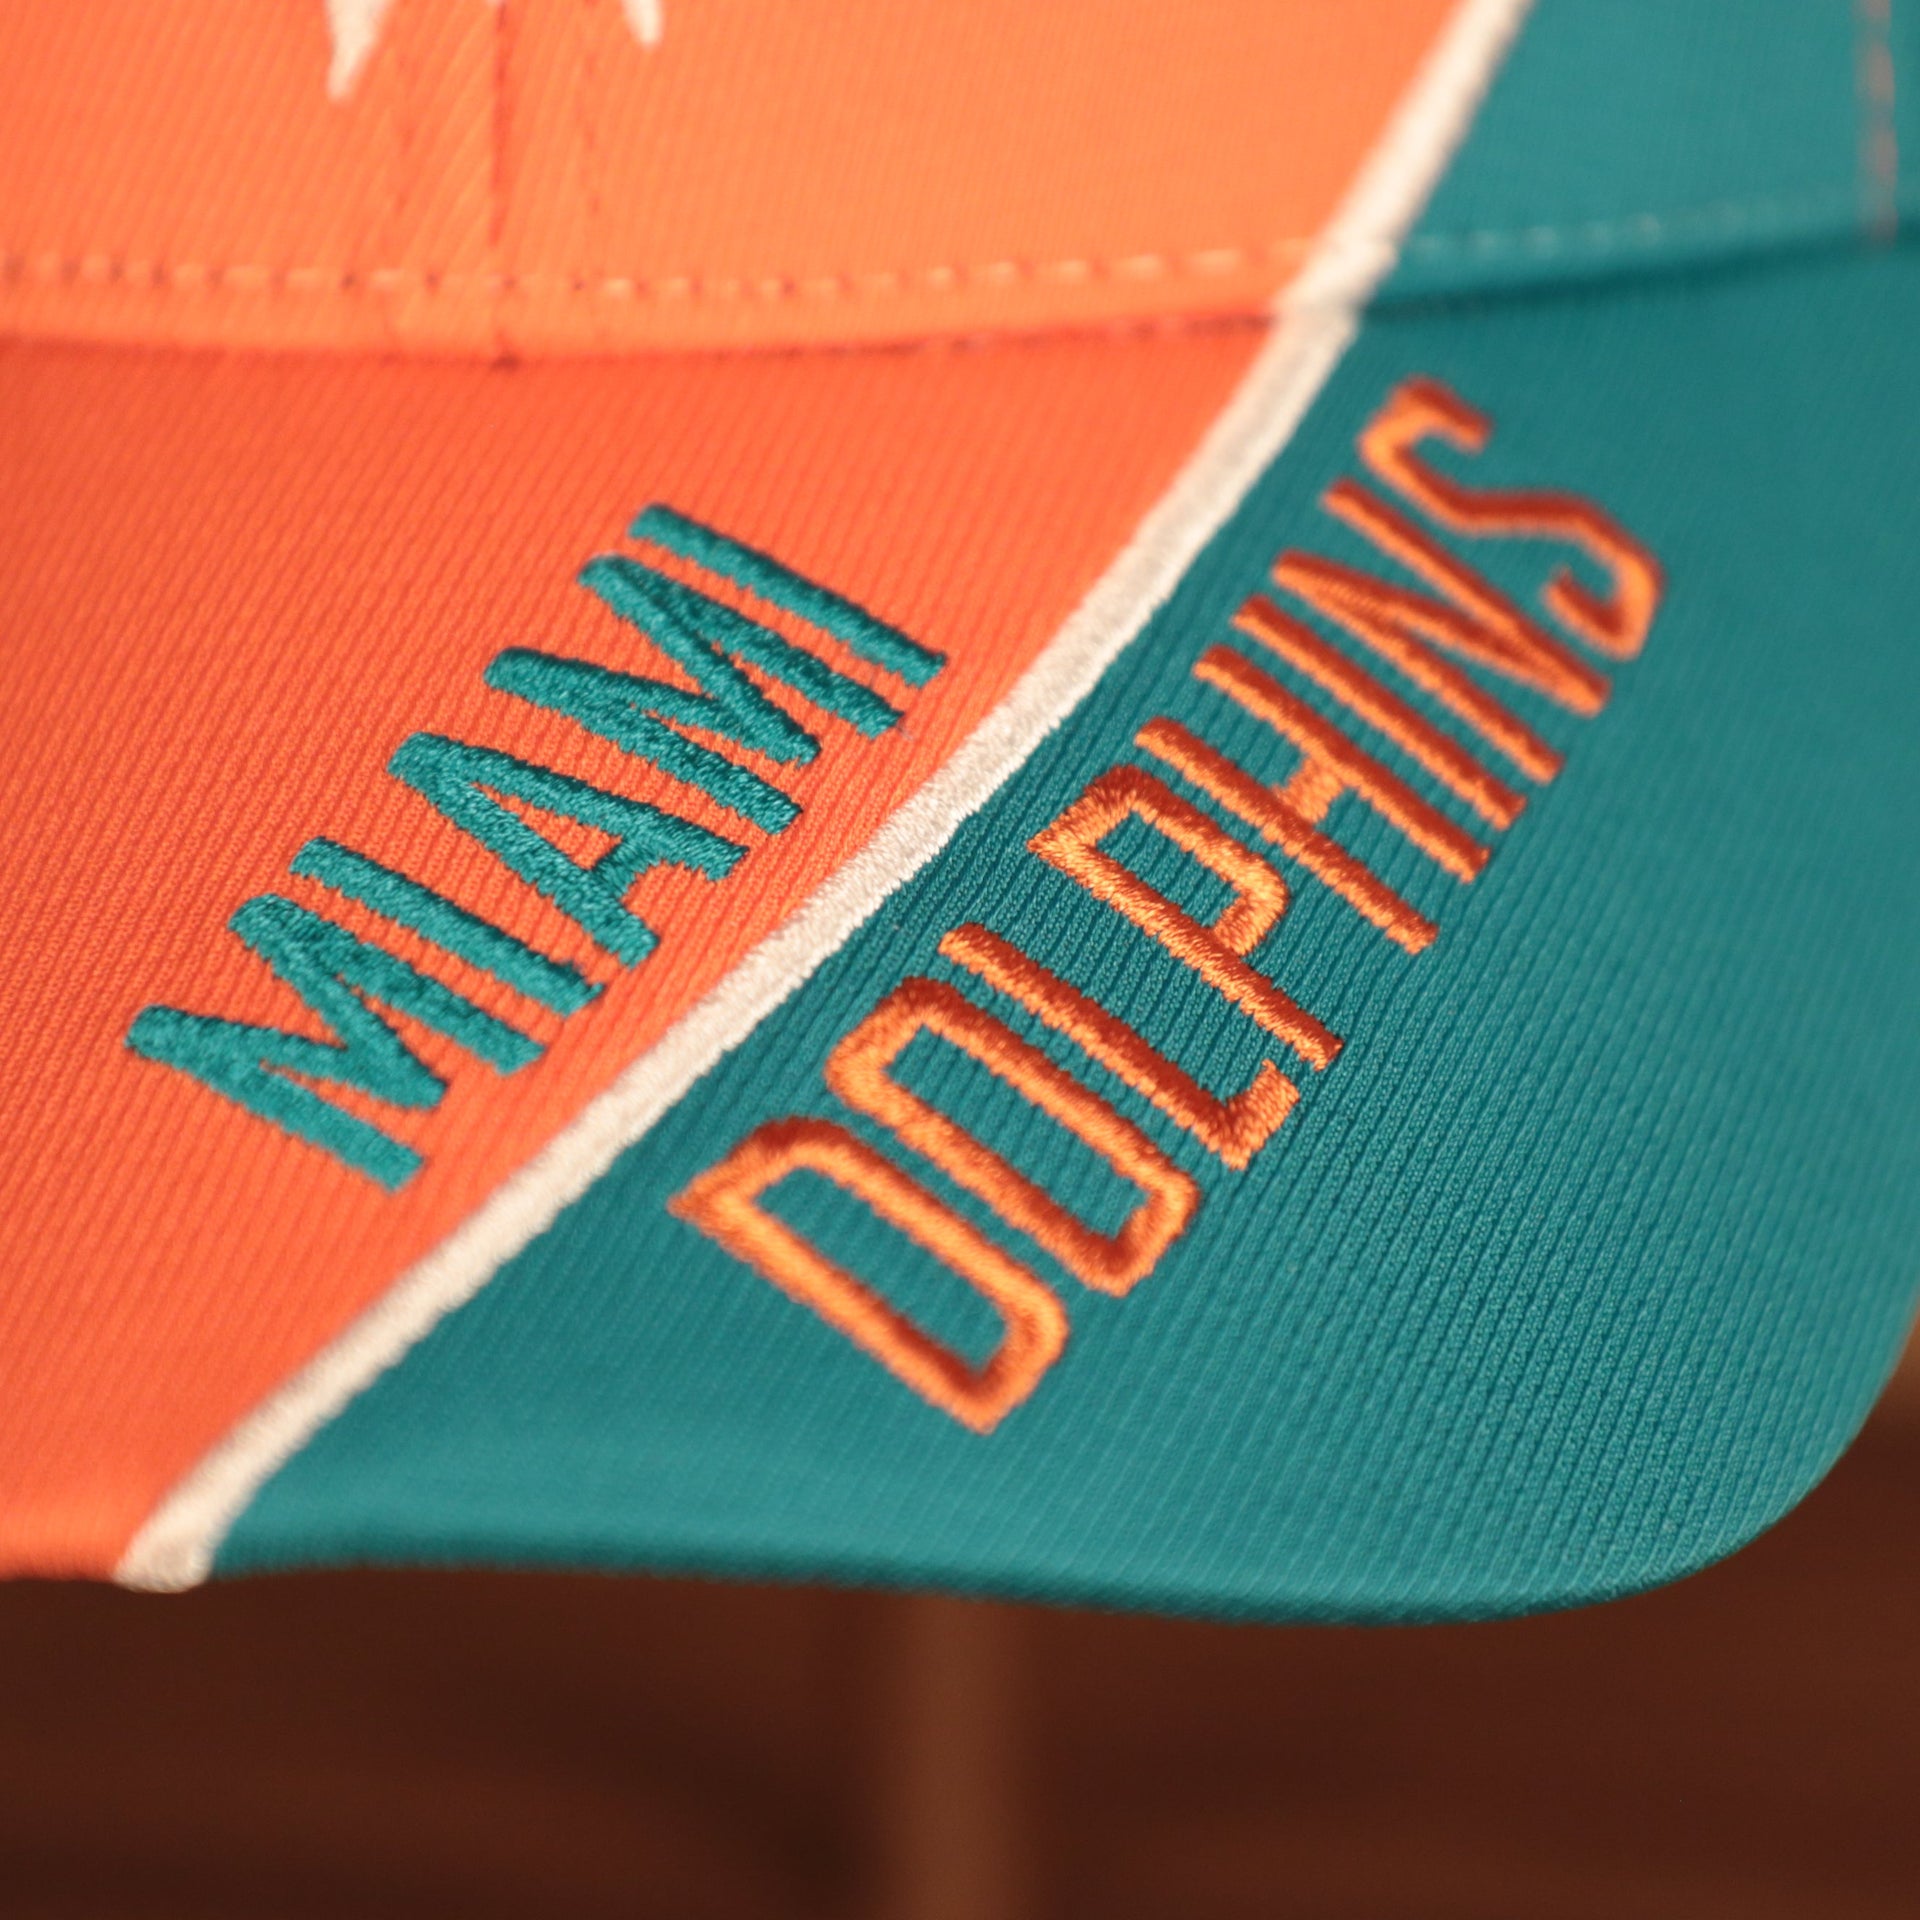 brim shot of the Miami Dolphins Orange and Teal Adjustable Dad Hat